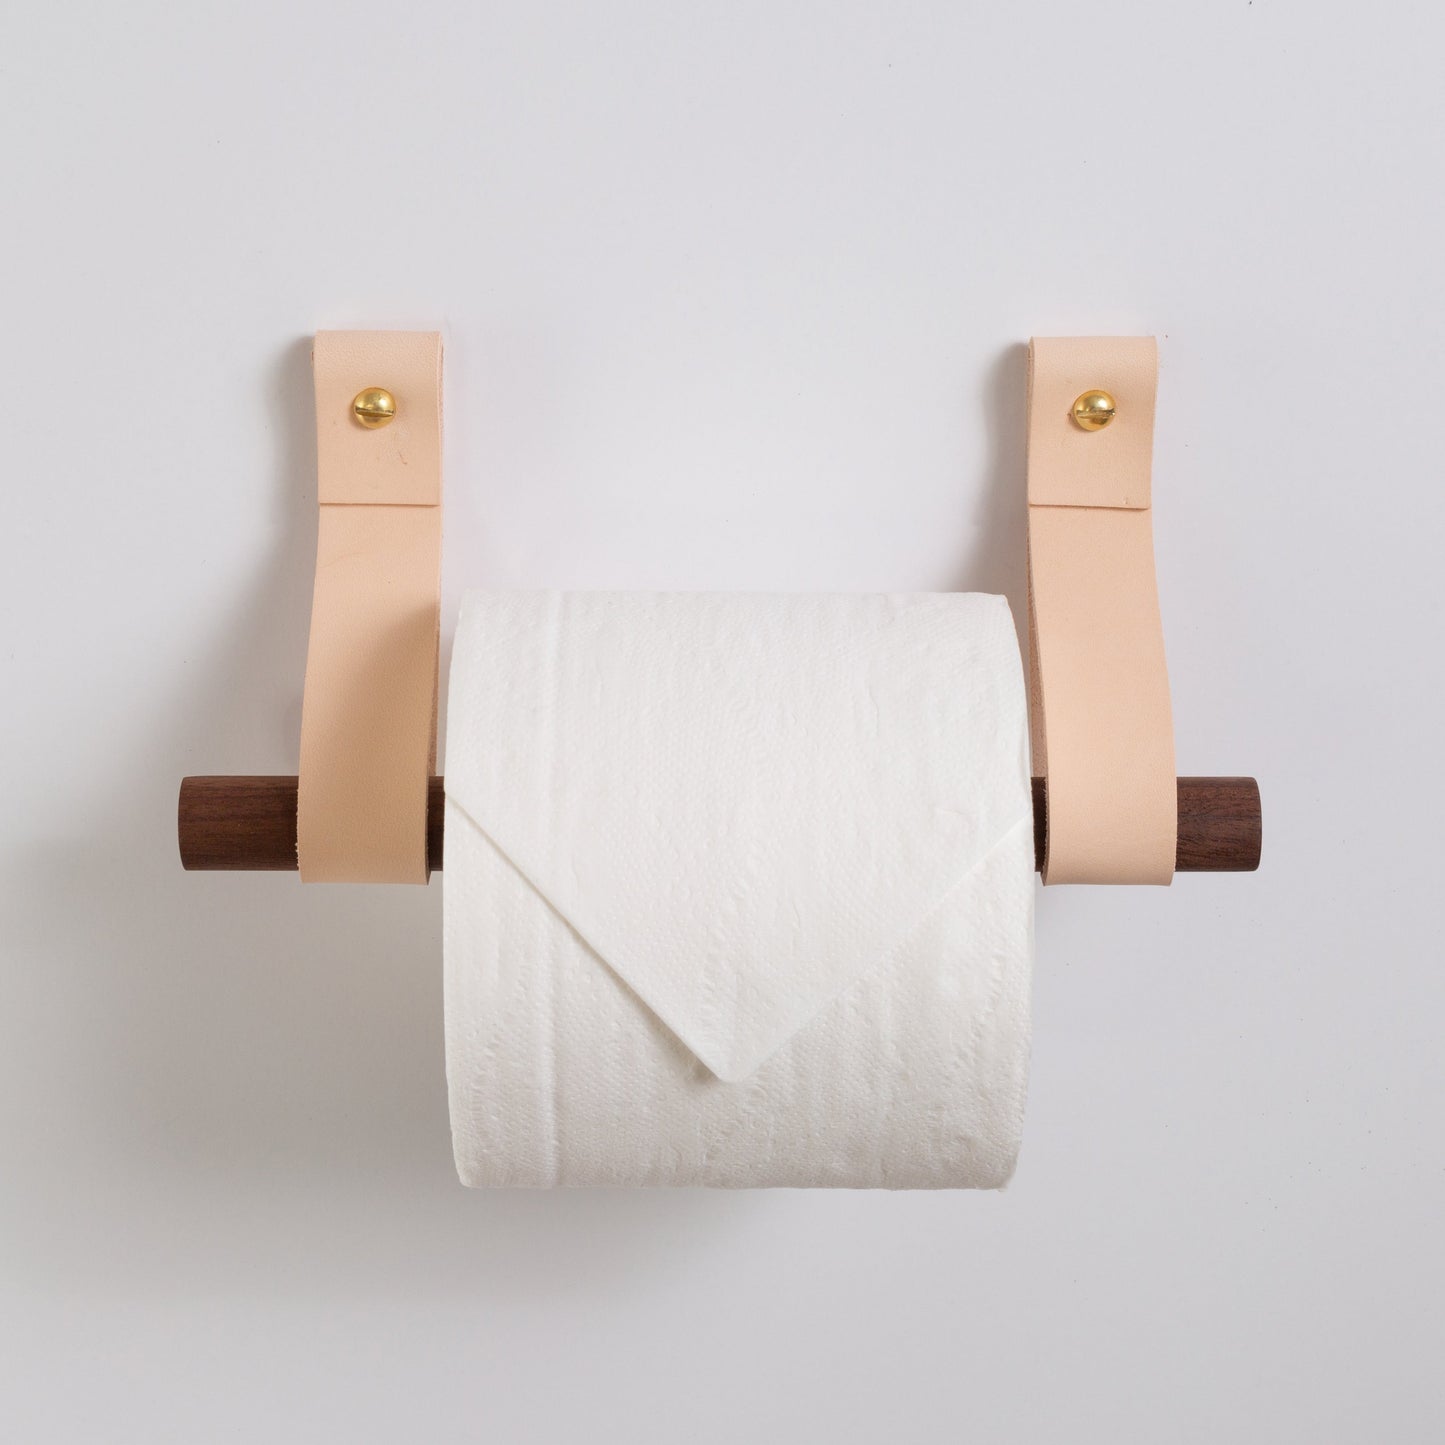 Leather Toilet Paper Holder Kit With Wood Dowel Walnut or Birch